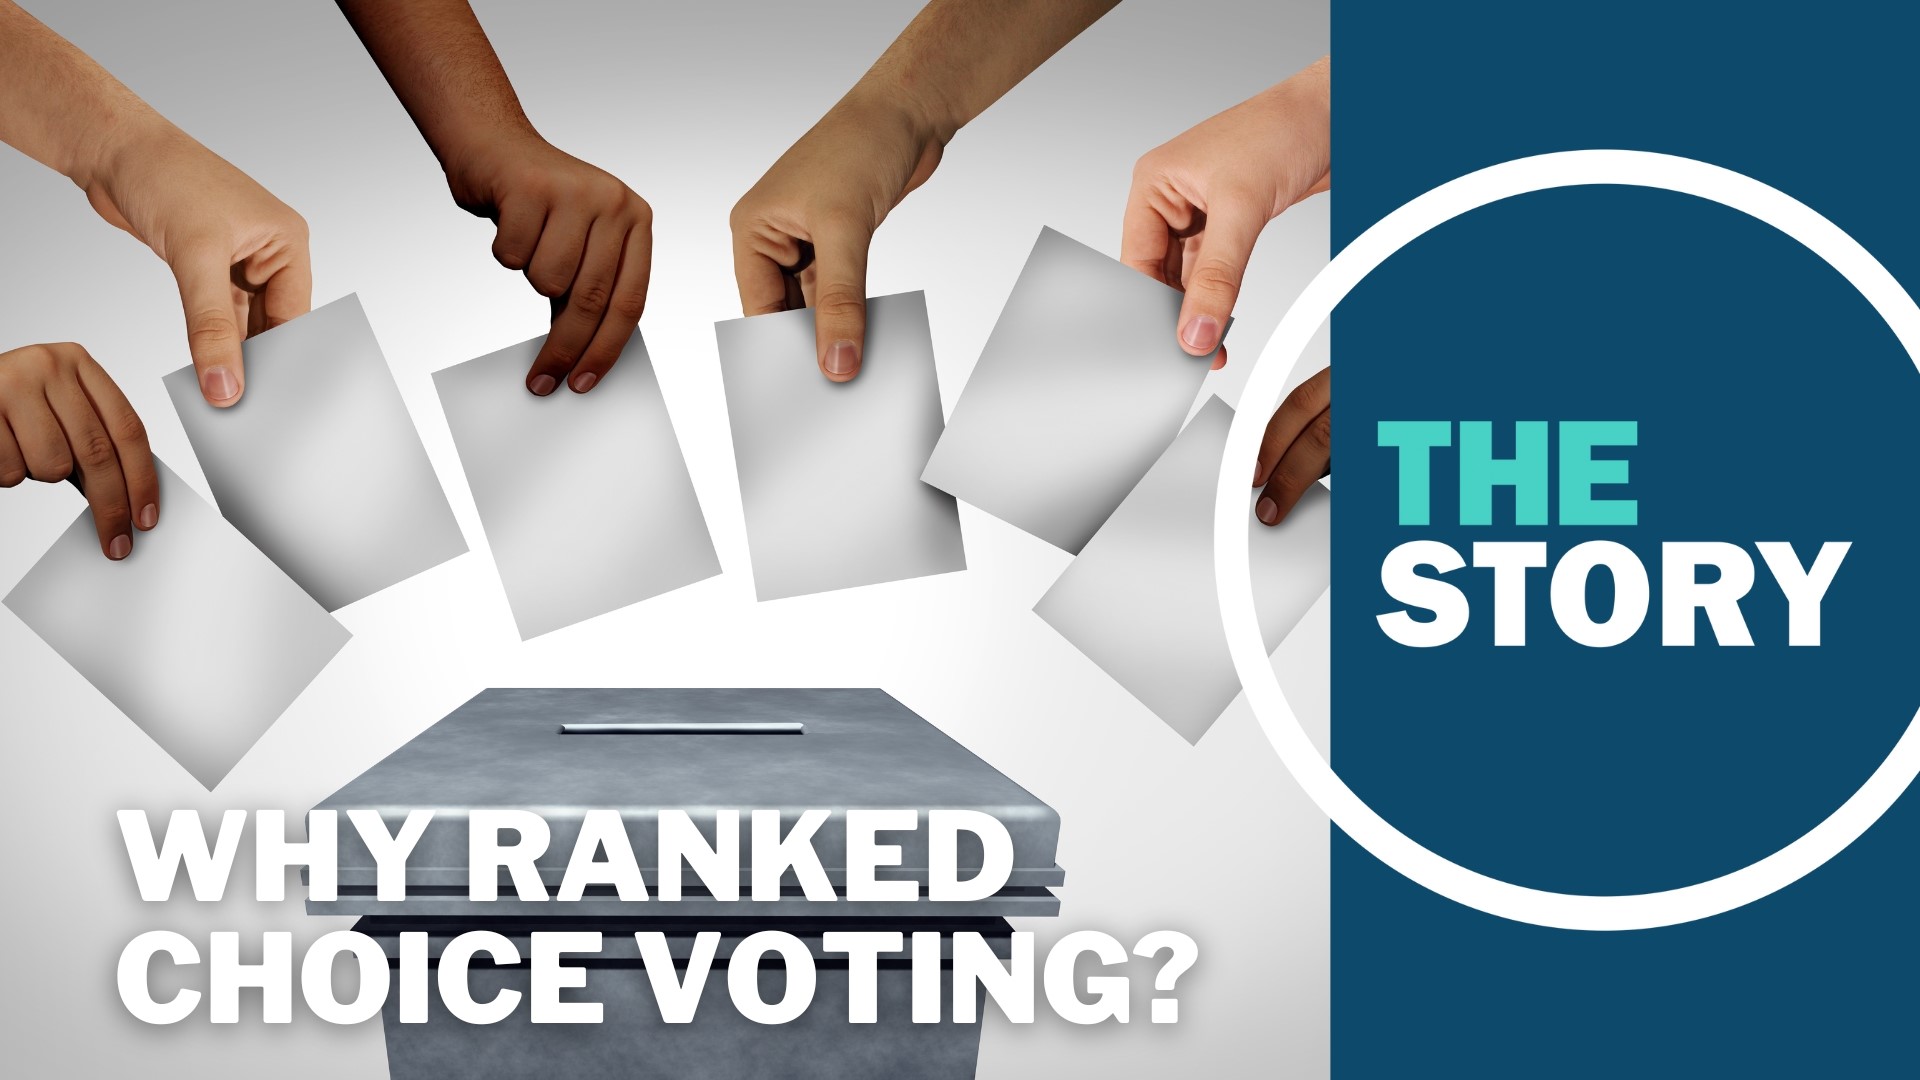 Ranked choice voting isn’t widely used in the US, but it’s gaining popularity. We looked into why it might be an improvement and what its drawbacks might be.